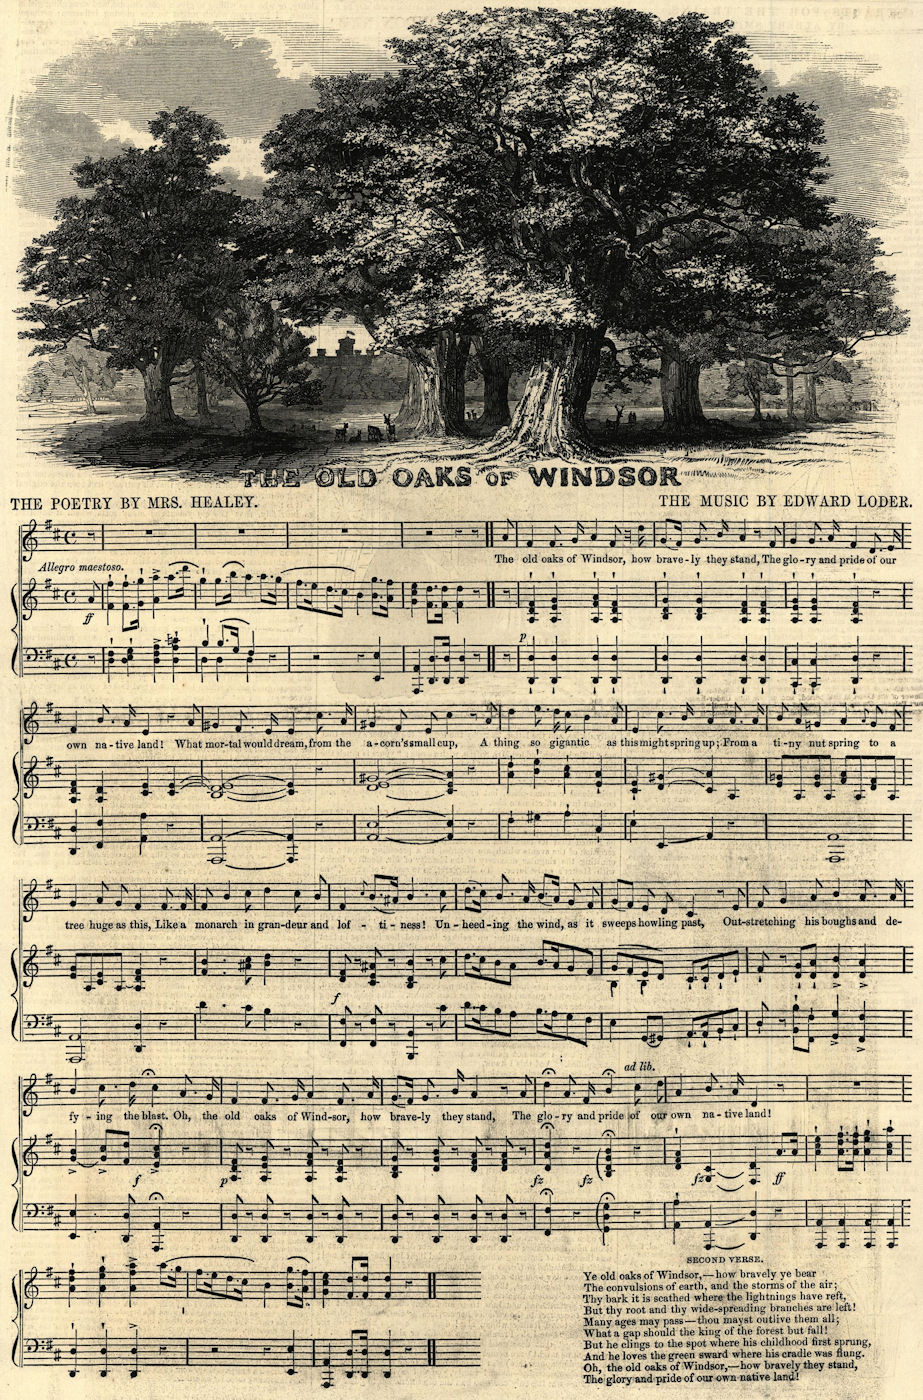 Associate Product The Old Oaks of Windsor. Sheet music. Healey. Edward Loder 1846 ILN full page